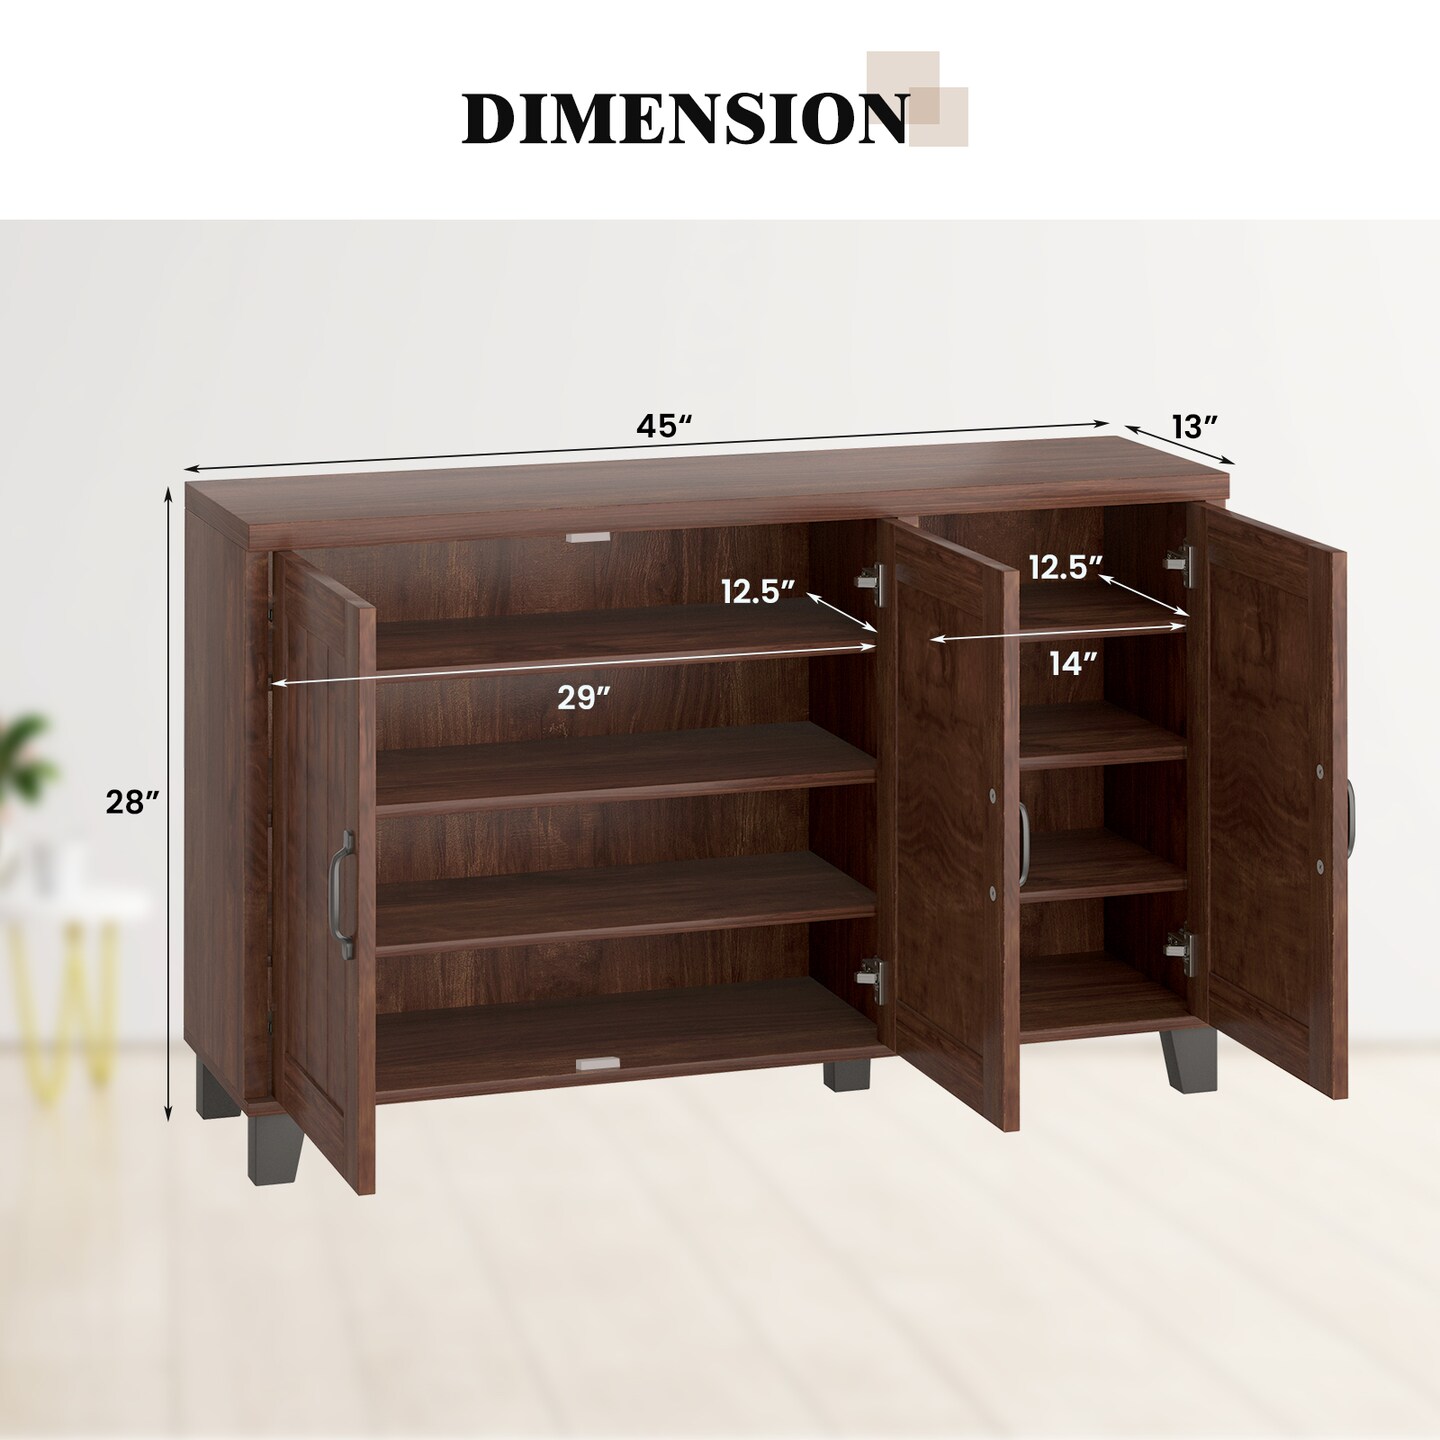 3-Door Buffet Sideboard with Adjustable Shelves and Anti-Tipping Kits-Brown